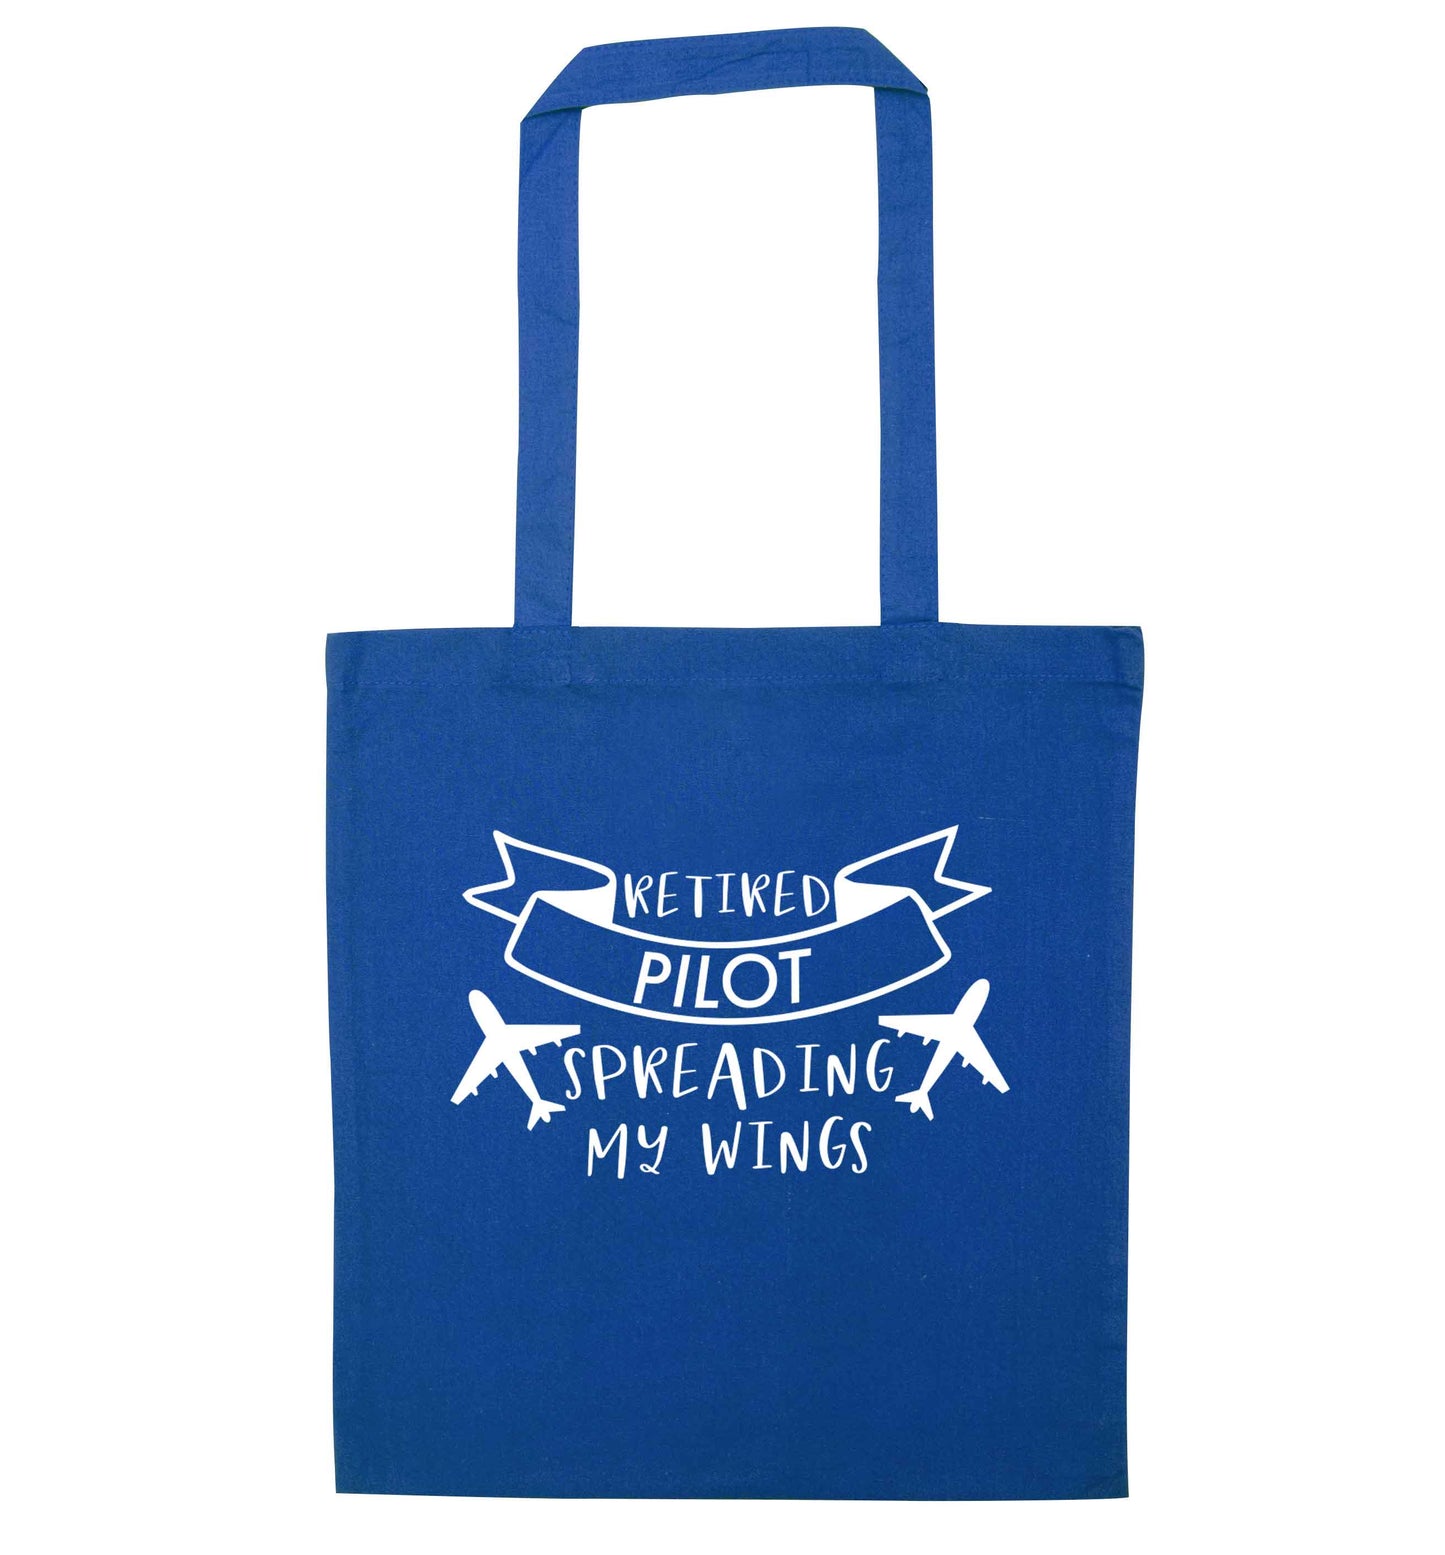 Retired pilot spreading my wings blue tote bag